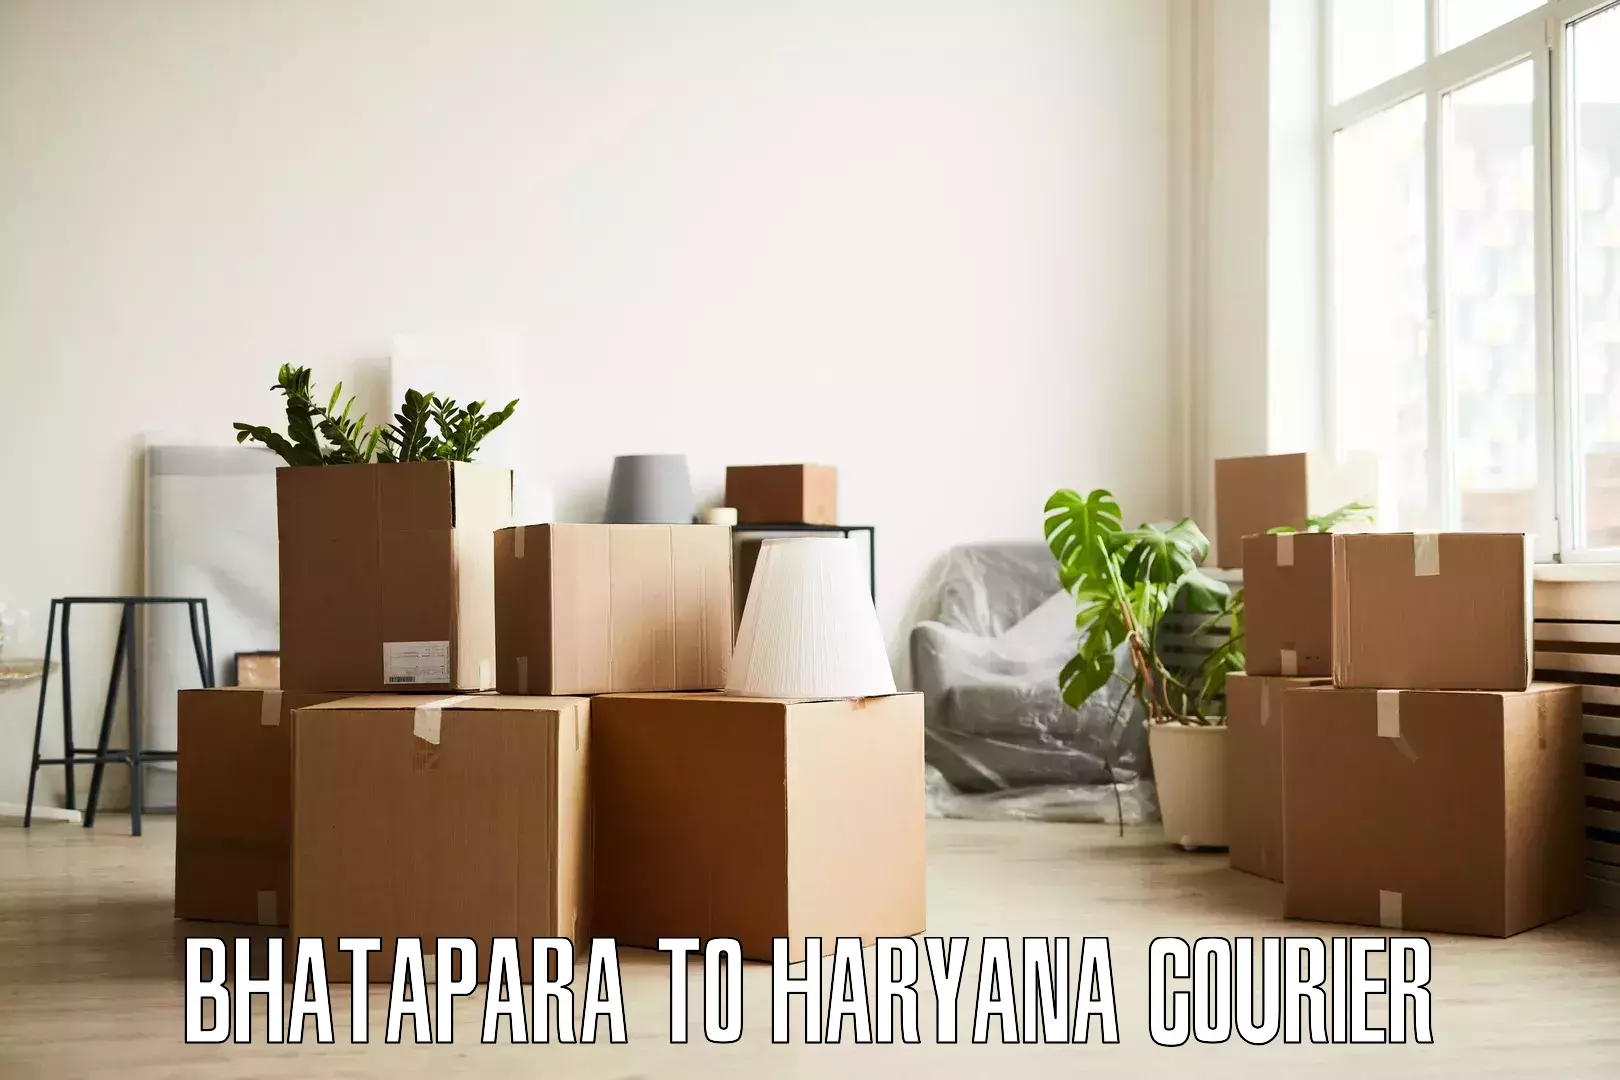 Reliable moving assistance in Bhatapara to Naraingarh